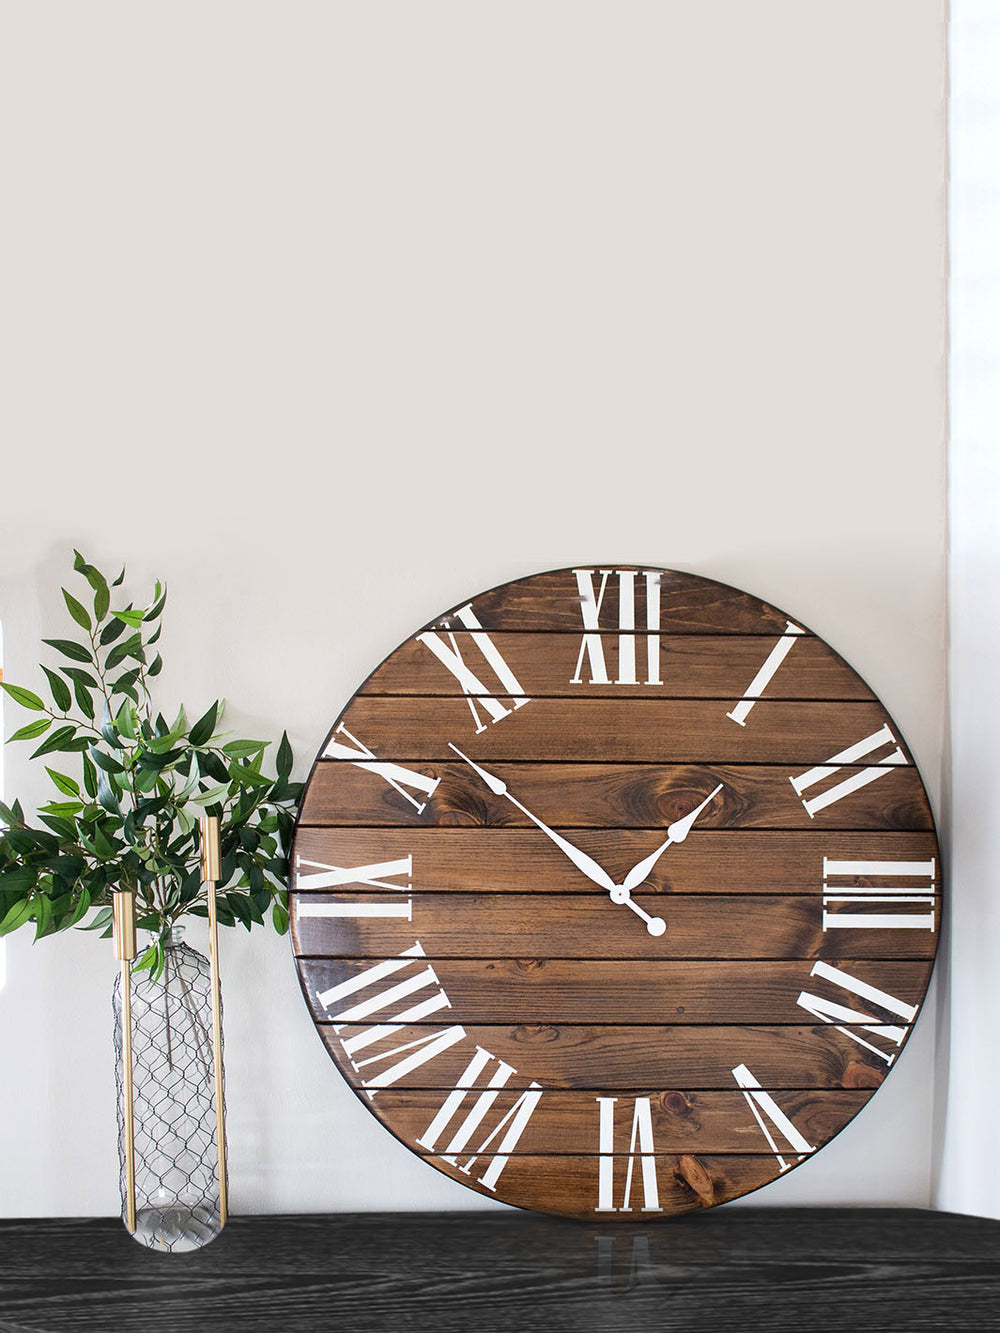 Dark Stained Large Farmhouse Wall Clock with White Roman Numerals Earthly Comfort Clocks 596-3